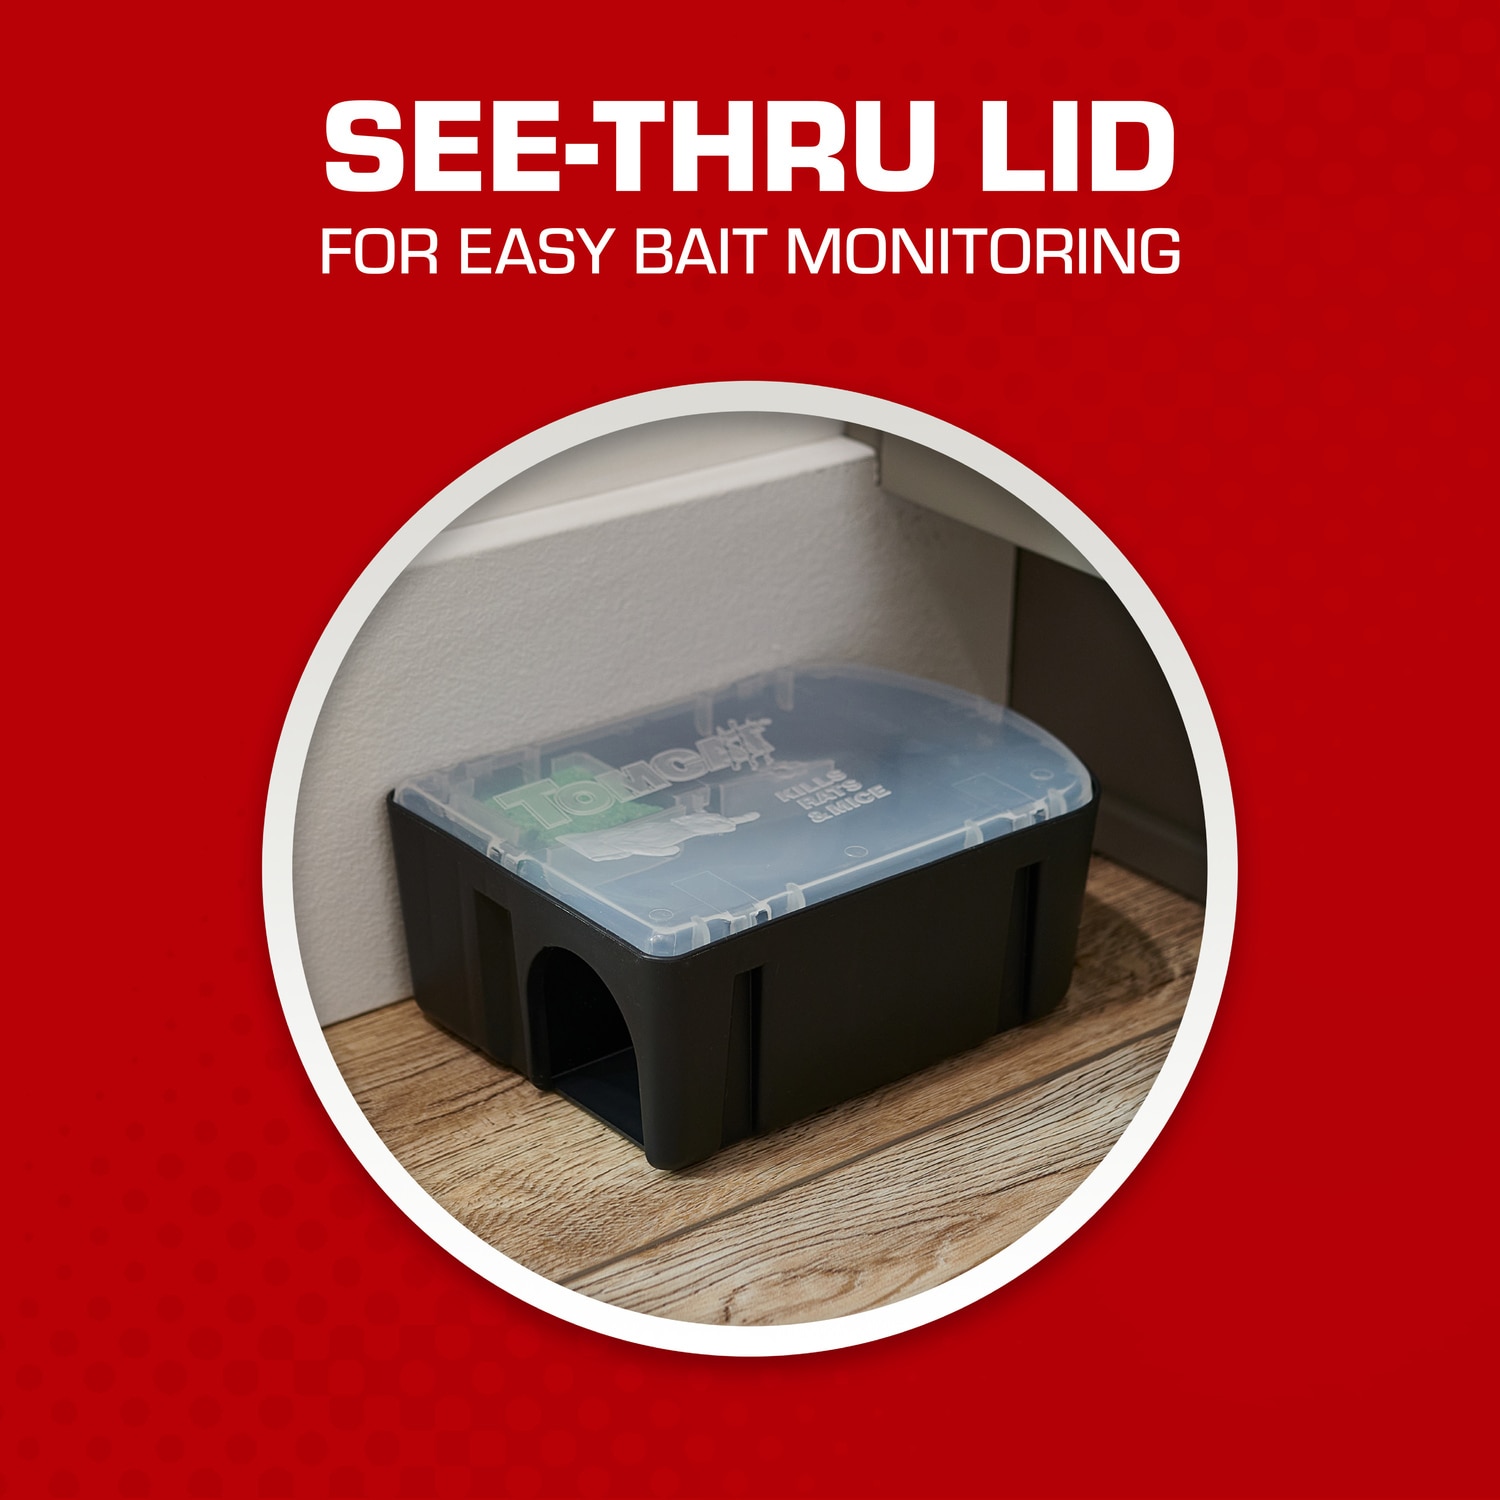  Exterminators Choice - 6 Pack Rat Bait Station Boxes with 1  Key - Heavy Duty Mouse Trap Poison Holder - Great for Catching Rats and Mice  - Pest Control 